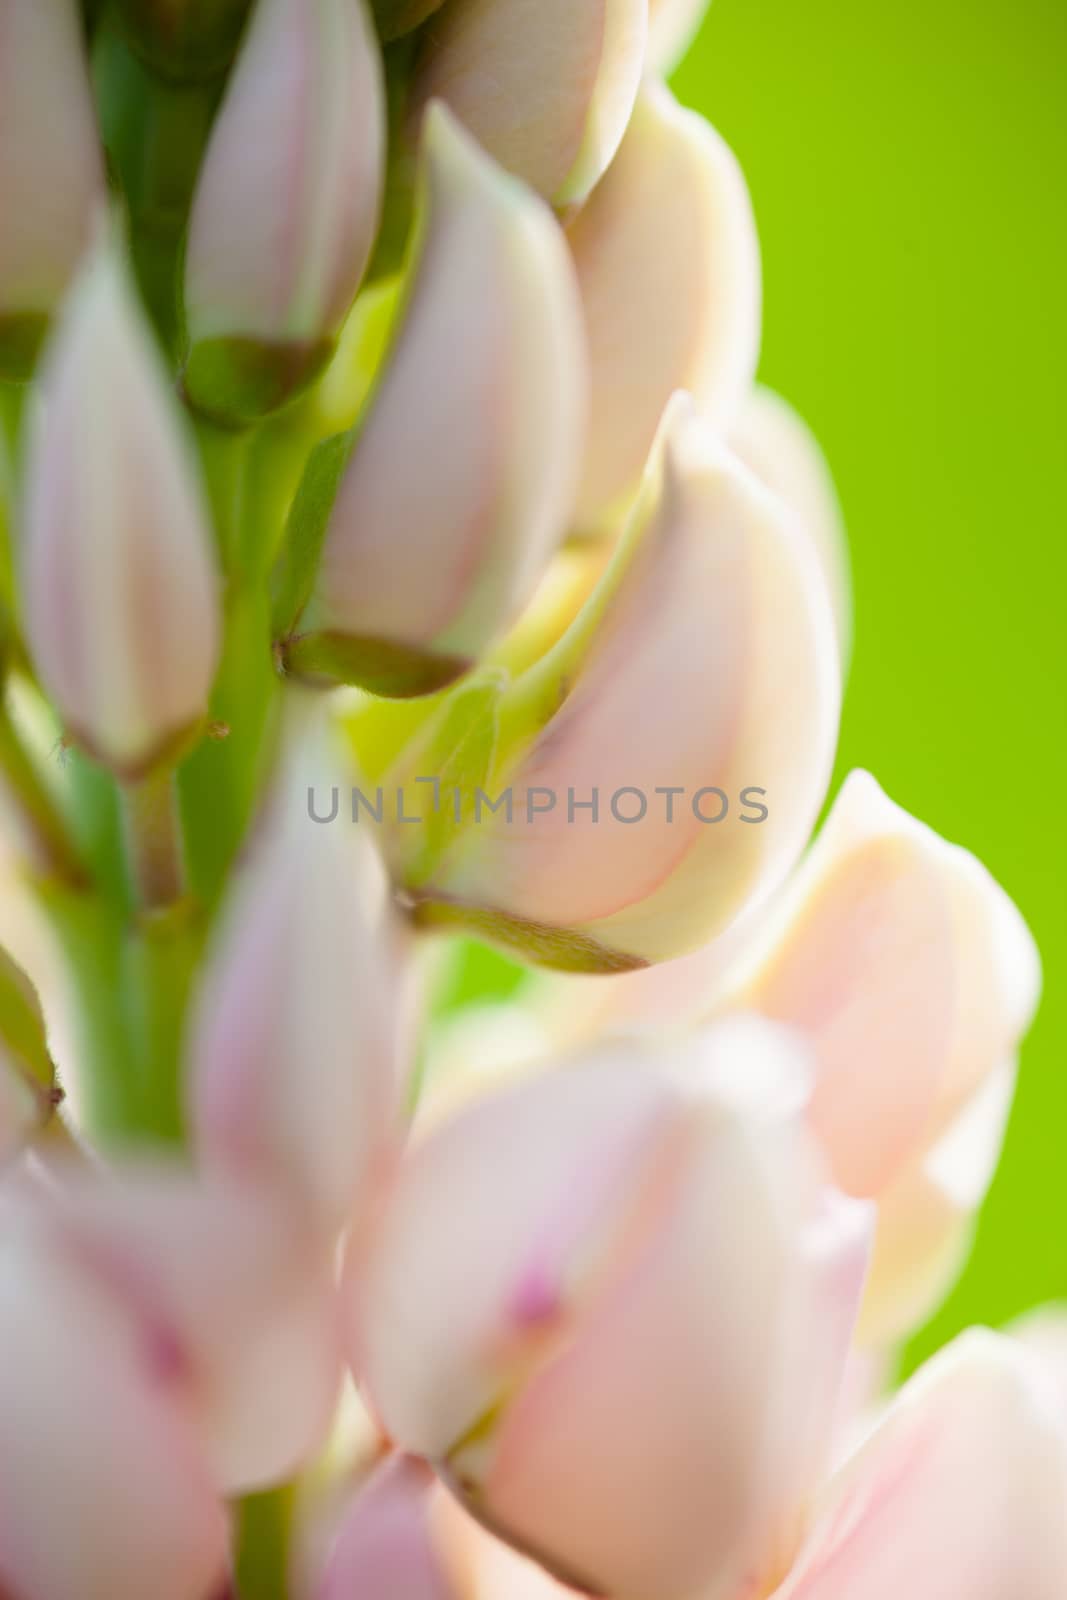 Lupin flowers (Lupinus) by rootstocks